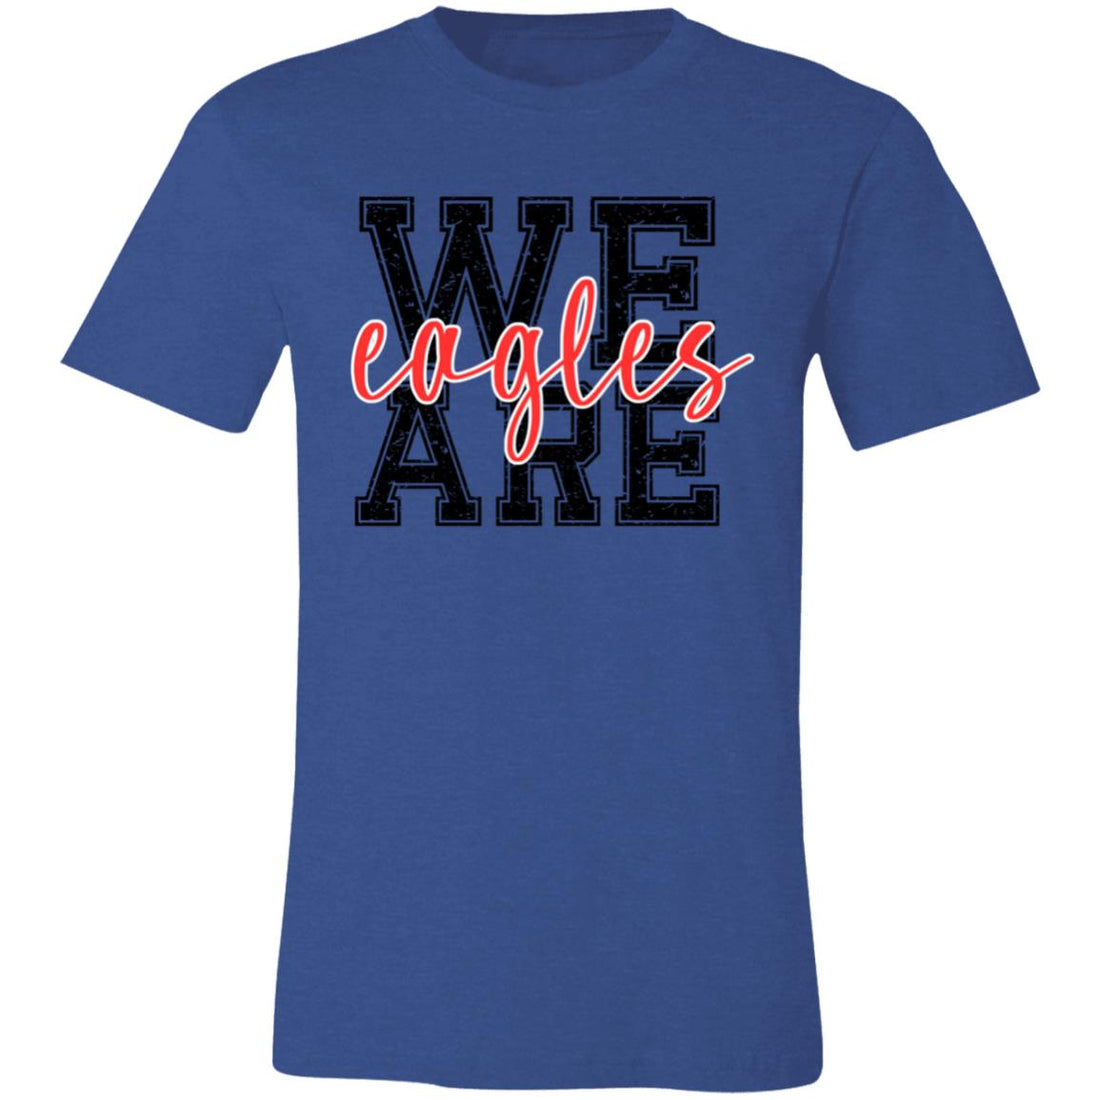 We Are Eagles Unisex Jersey Short-Sleeve T-Shirt - T-Shirts - Positively Sassy - We Are Eagles Unisex Jersey Short-Sleeve T-Shirt